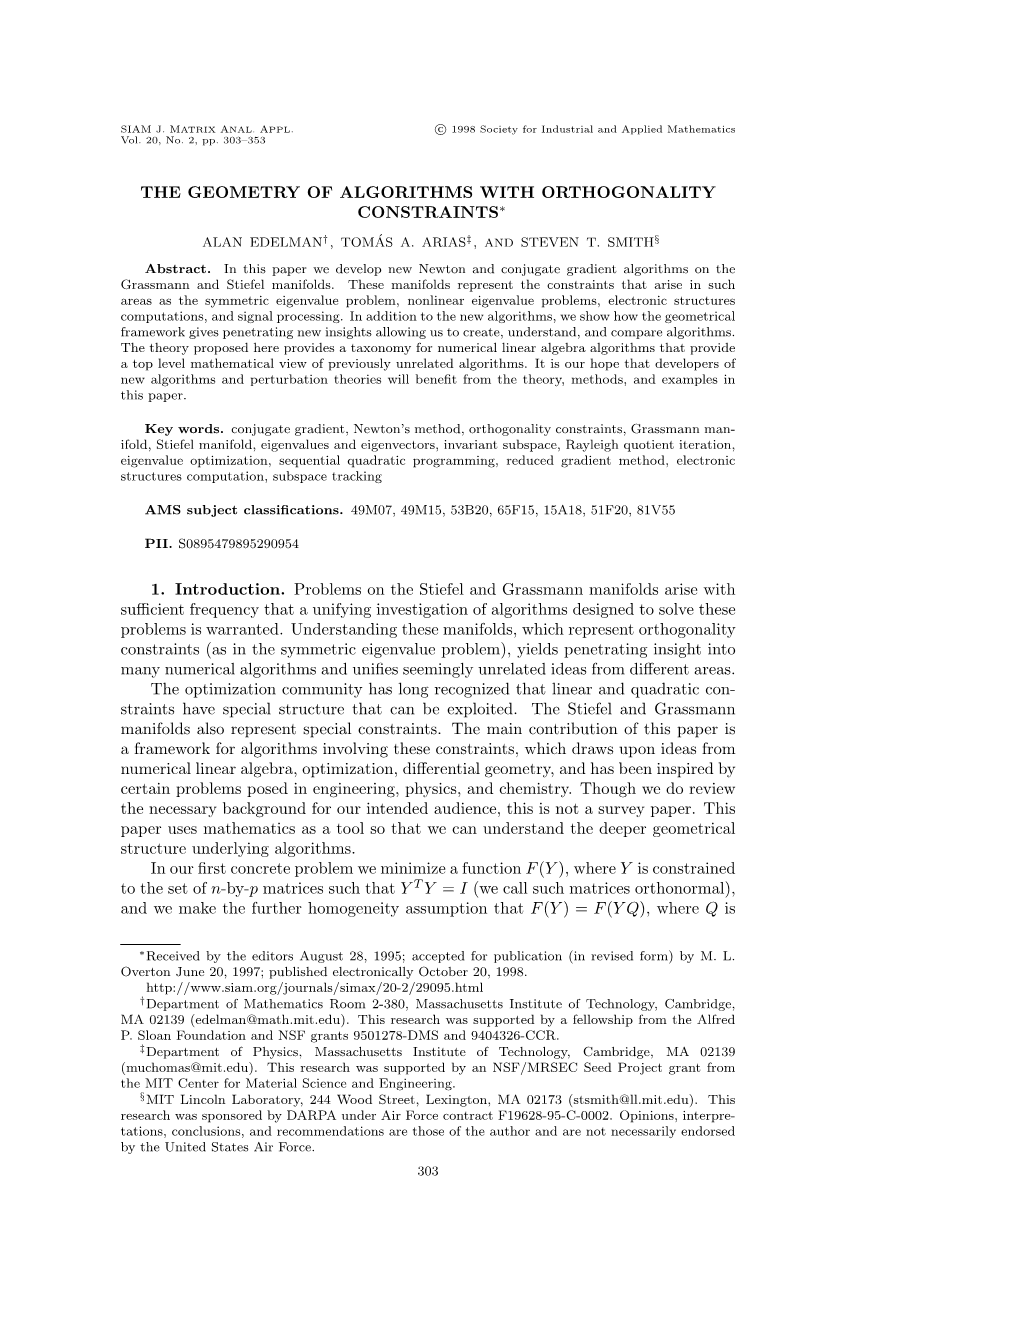 The Geometry of Algorithms with Orthogonality Constraints∗